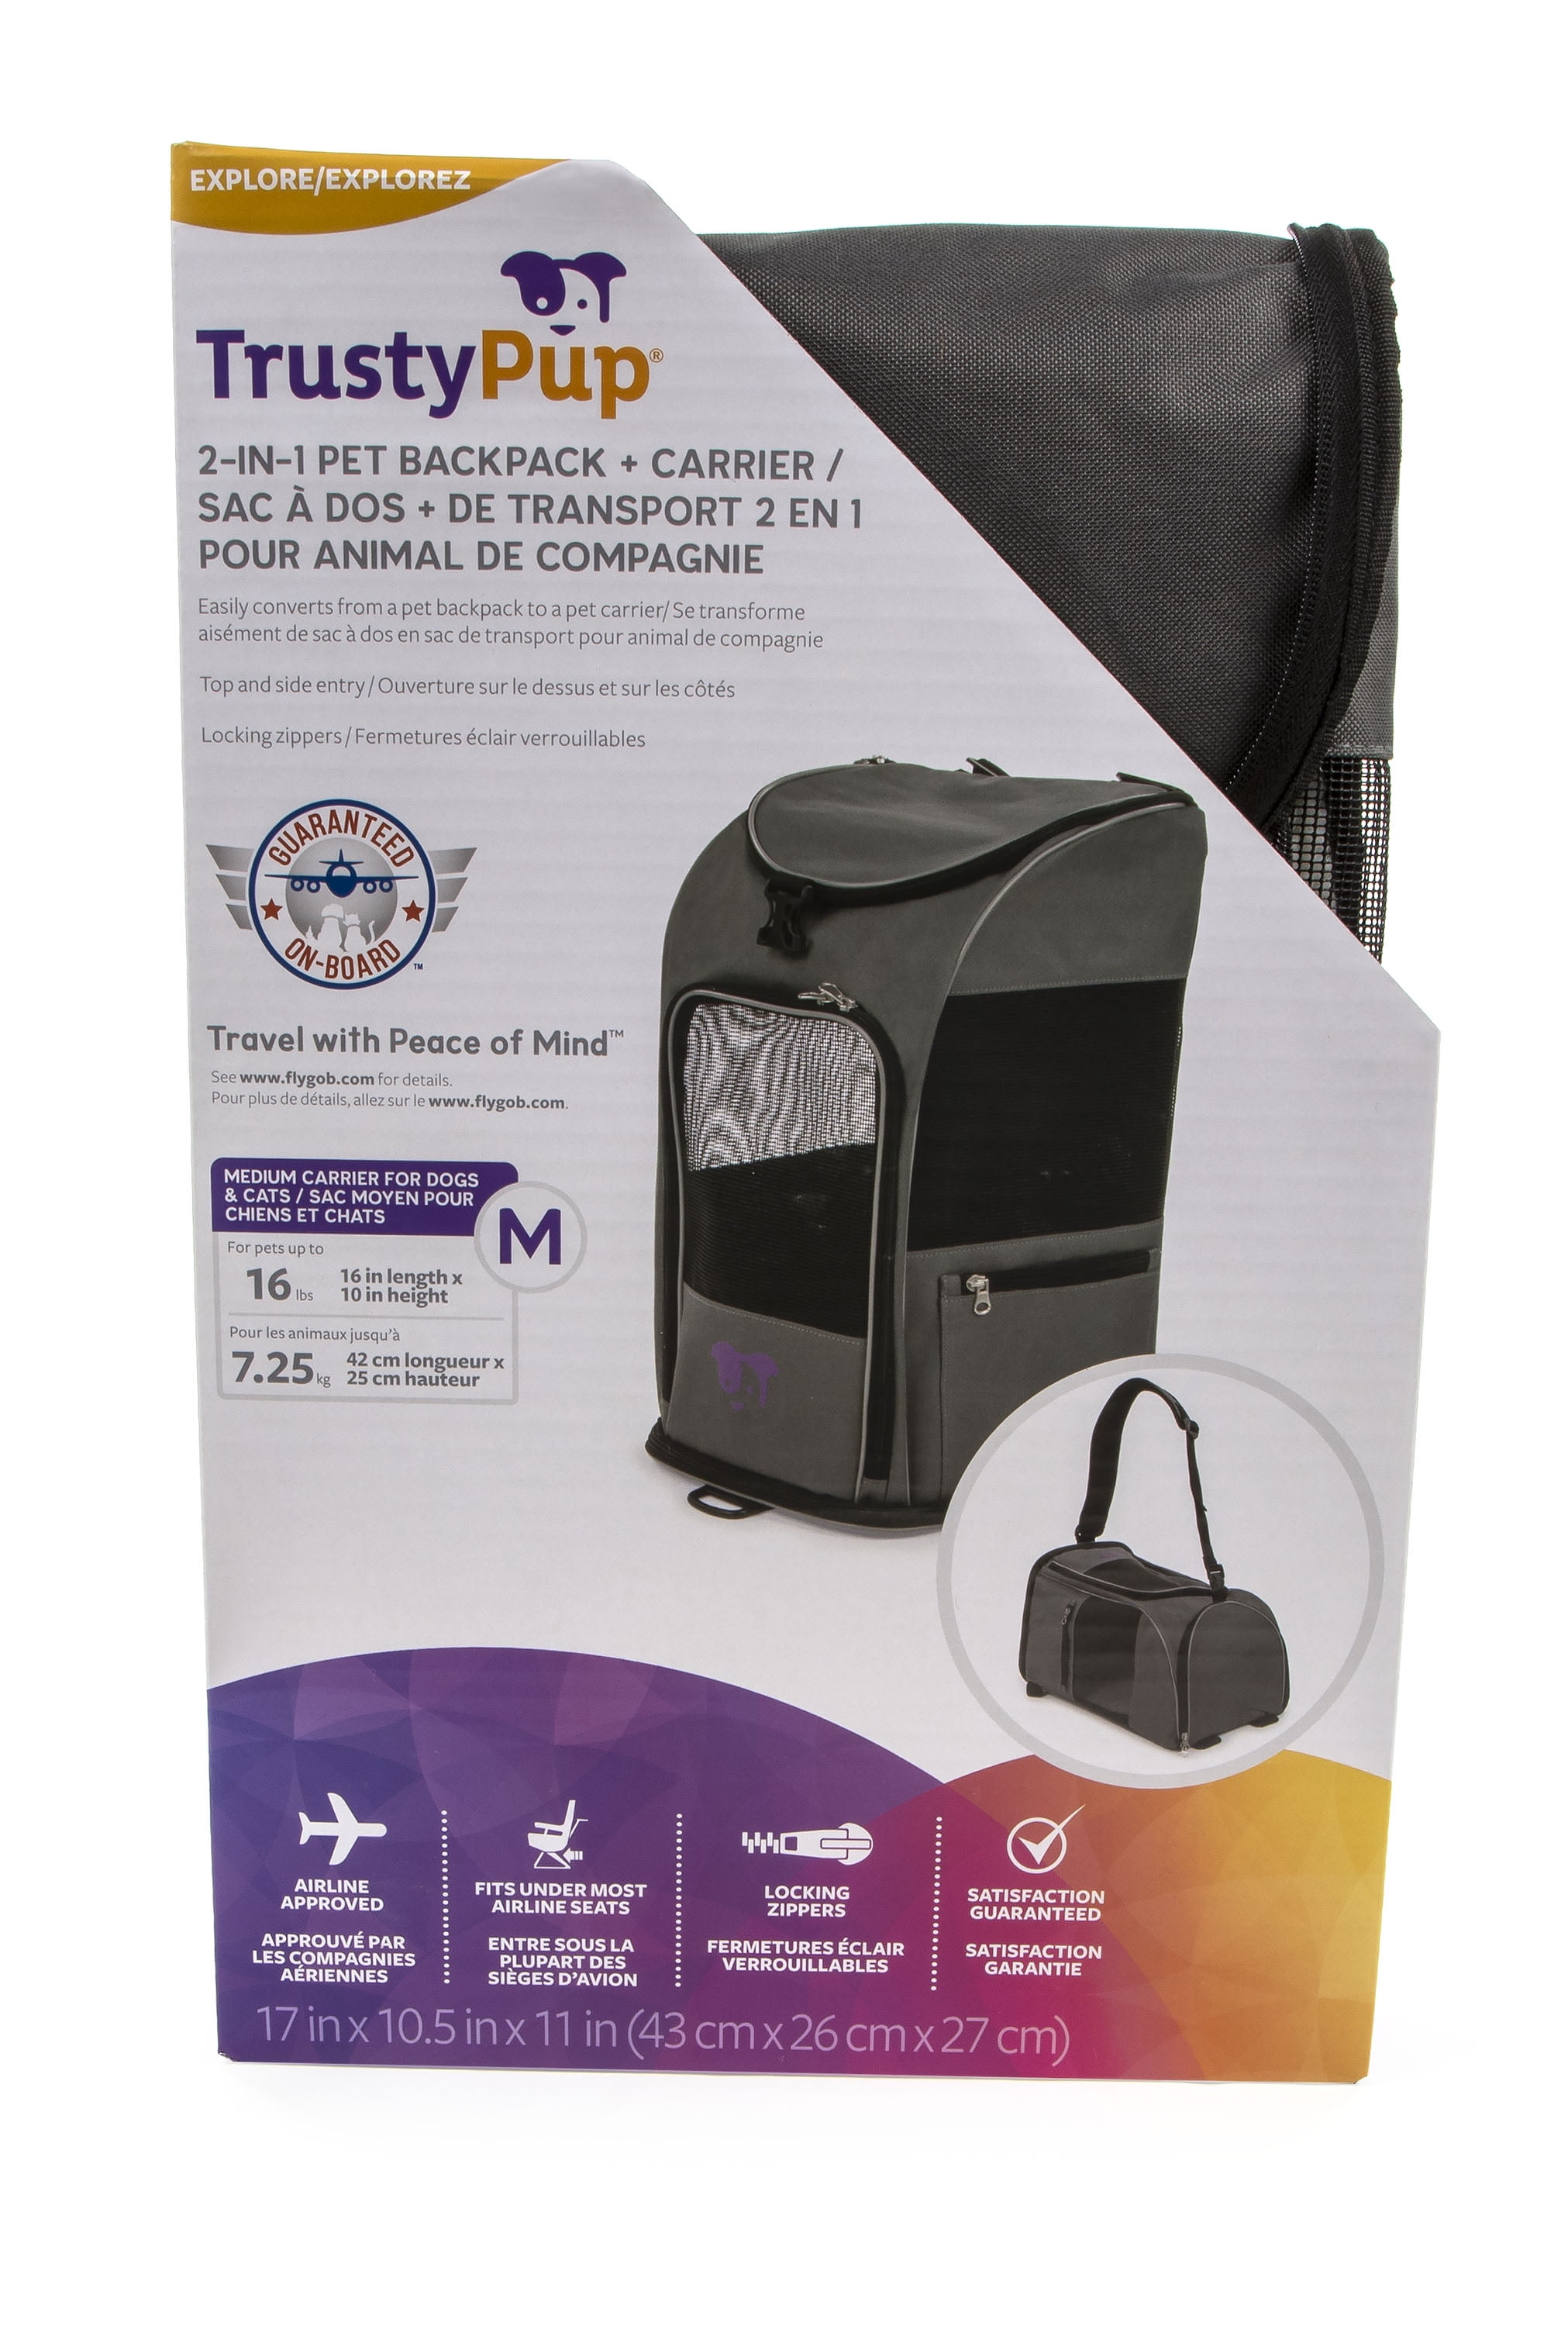 dispersion Unrelenting Beautiful woman TrustyPup 2-in-1 Pet Backpack Travel Carrier, Airline Approved & Guaranteed  On Board, Gray, Medium - Walmart.com